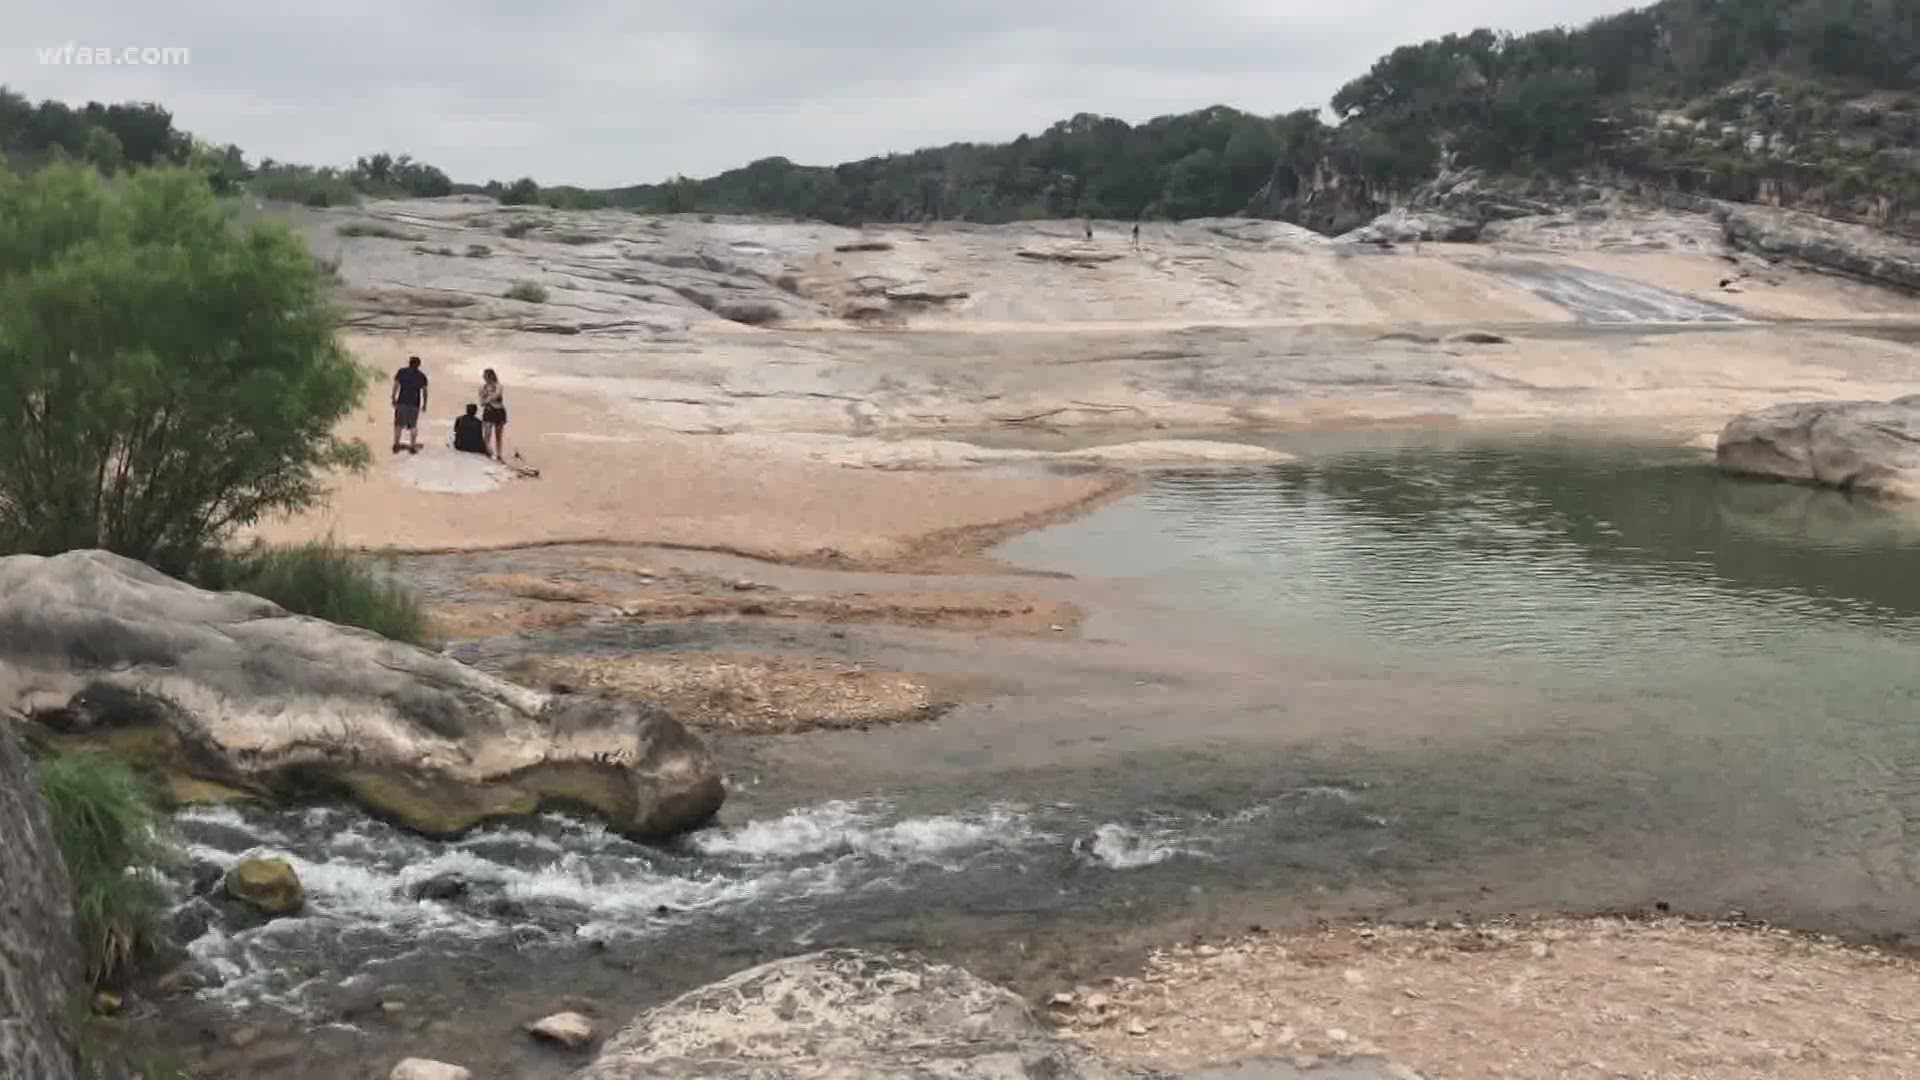 Texas State Parks says its seen almost double the amount of calls to its phone lines this summer compared to last year.